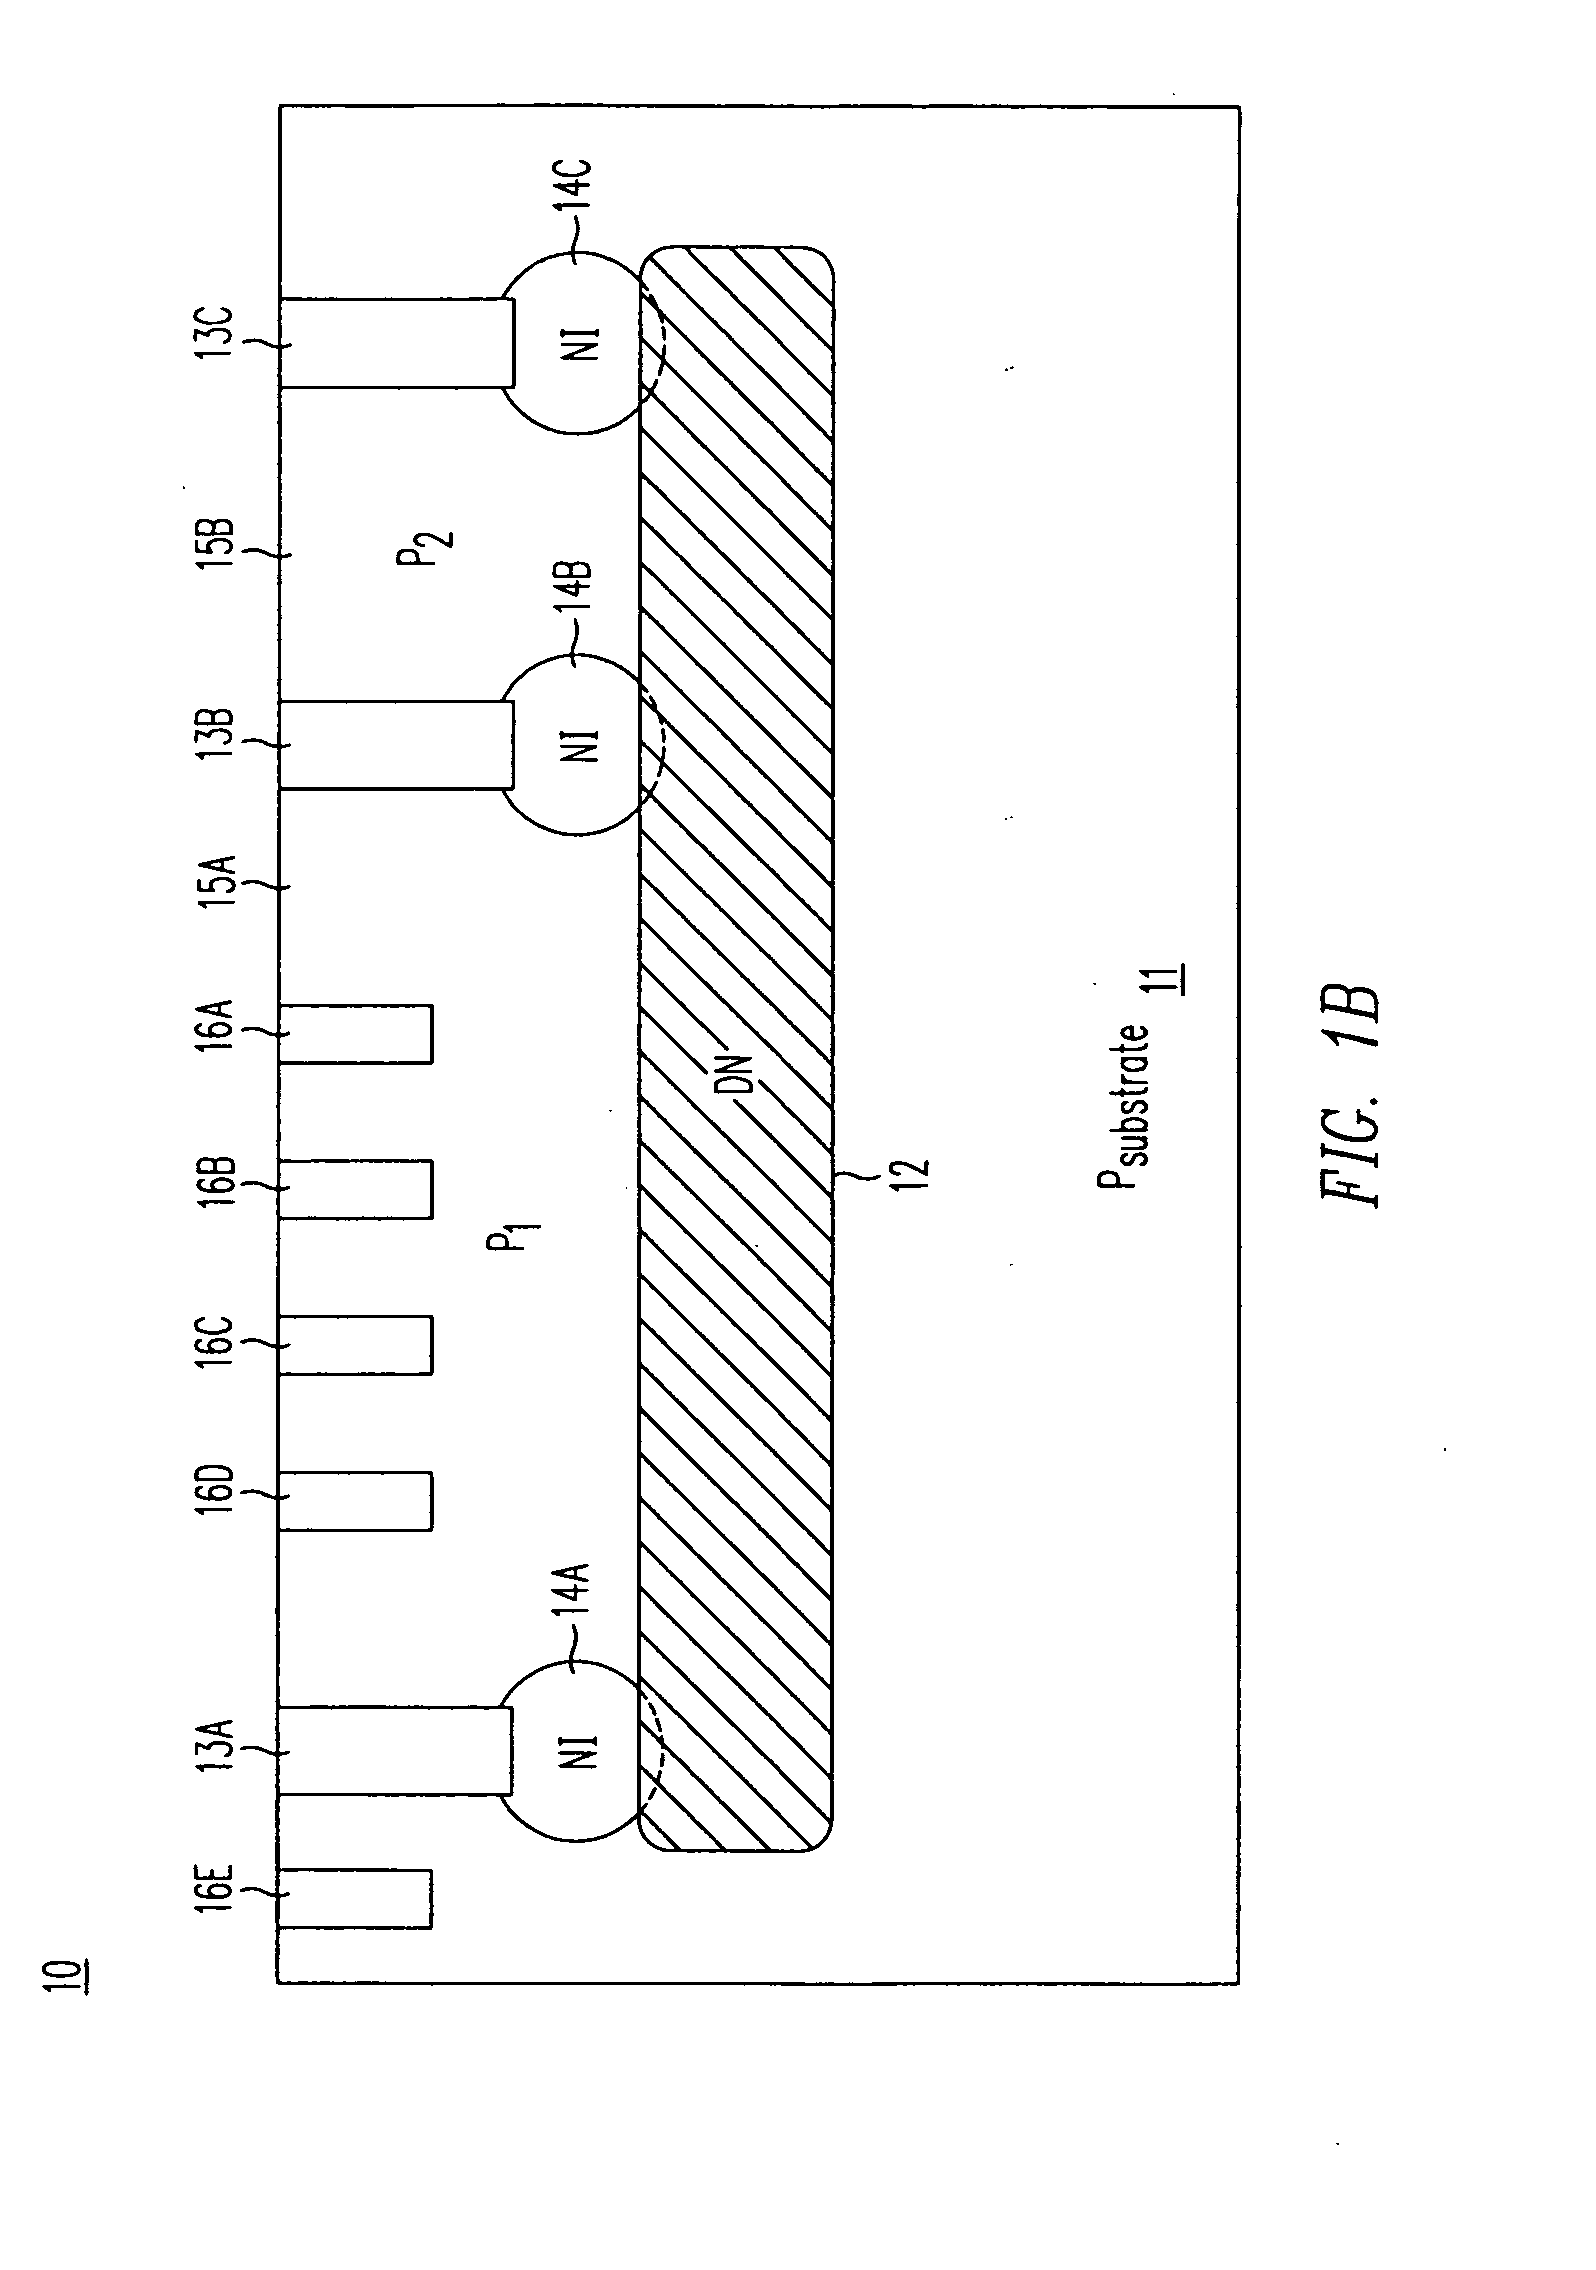 Lateral MOSFET